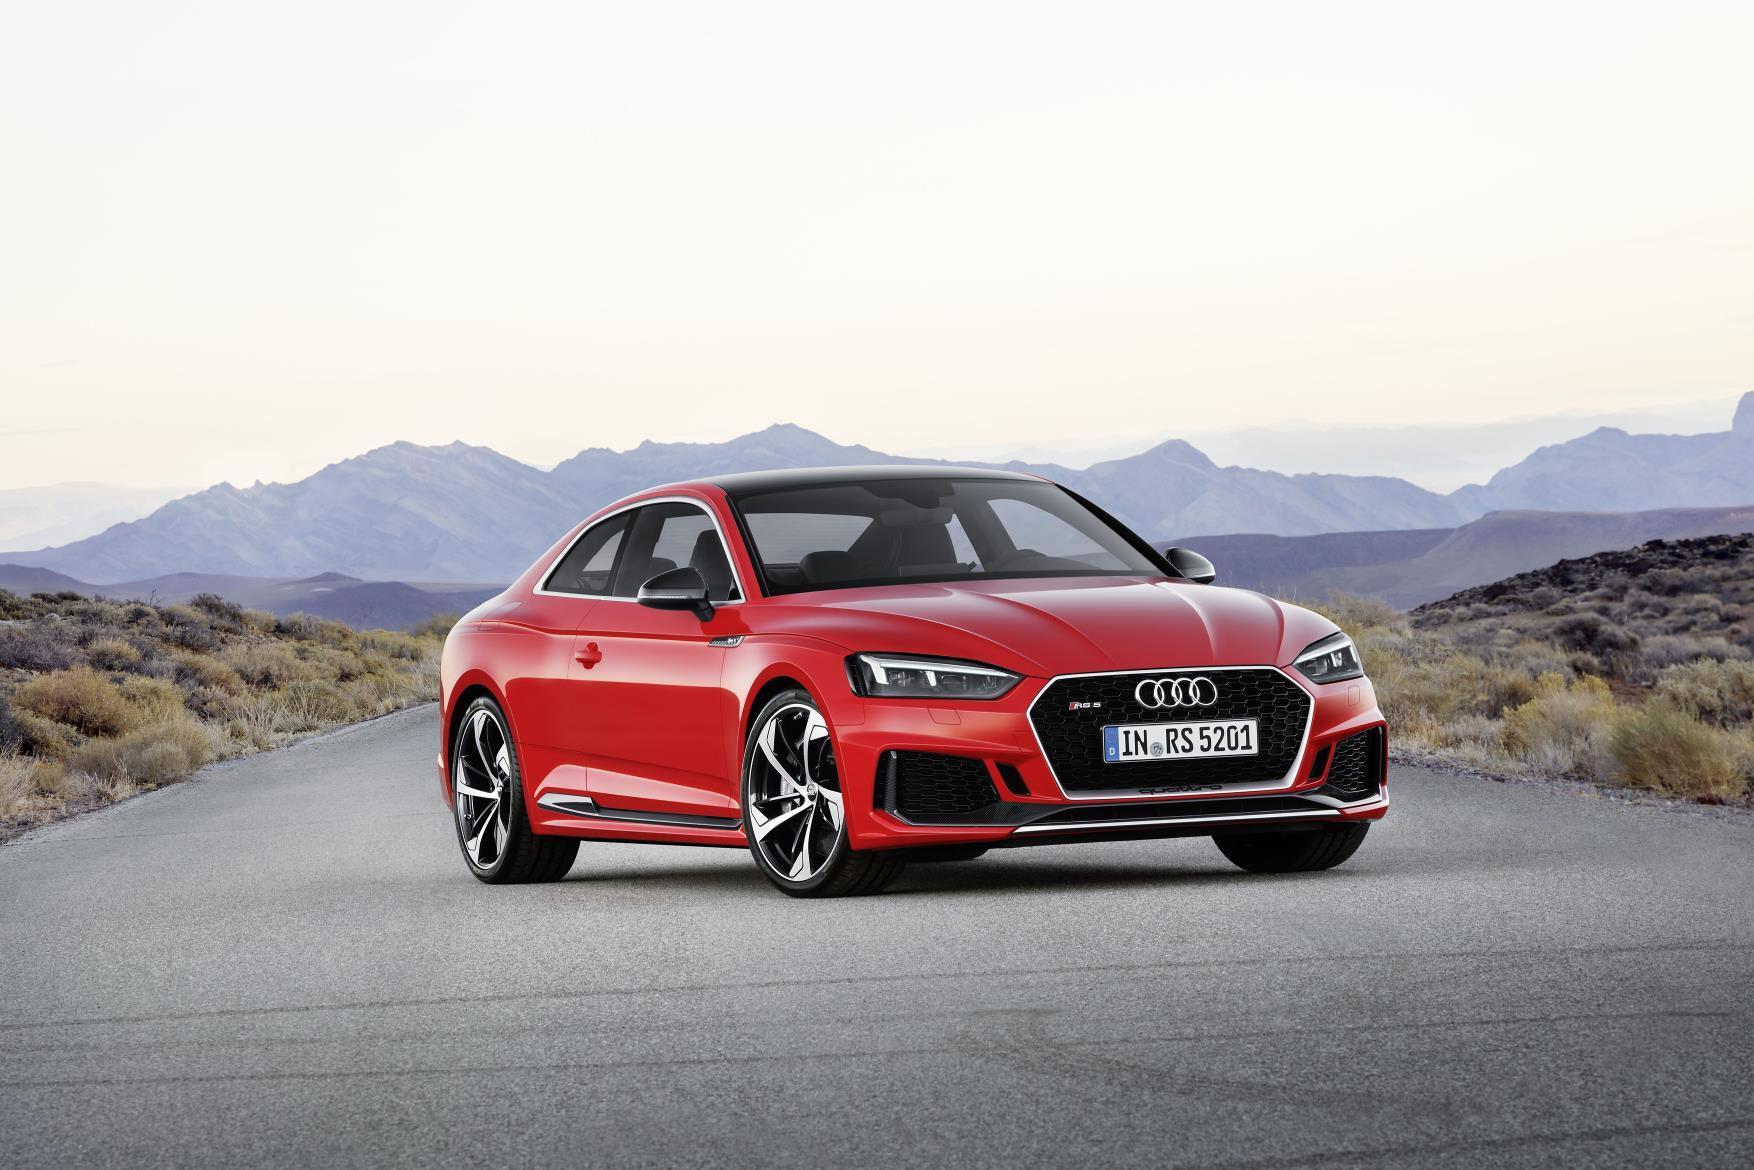 Audi Prices 2018 RS5 Coupe From EUR 900